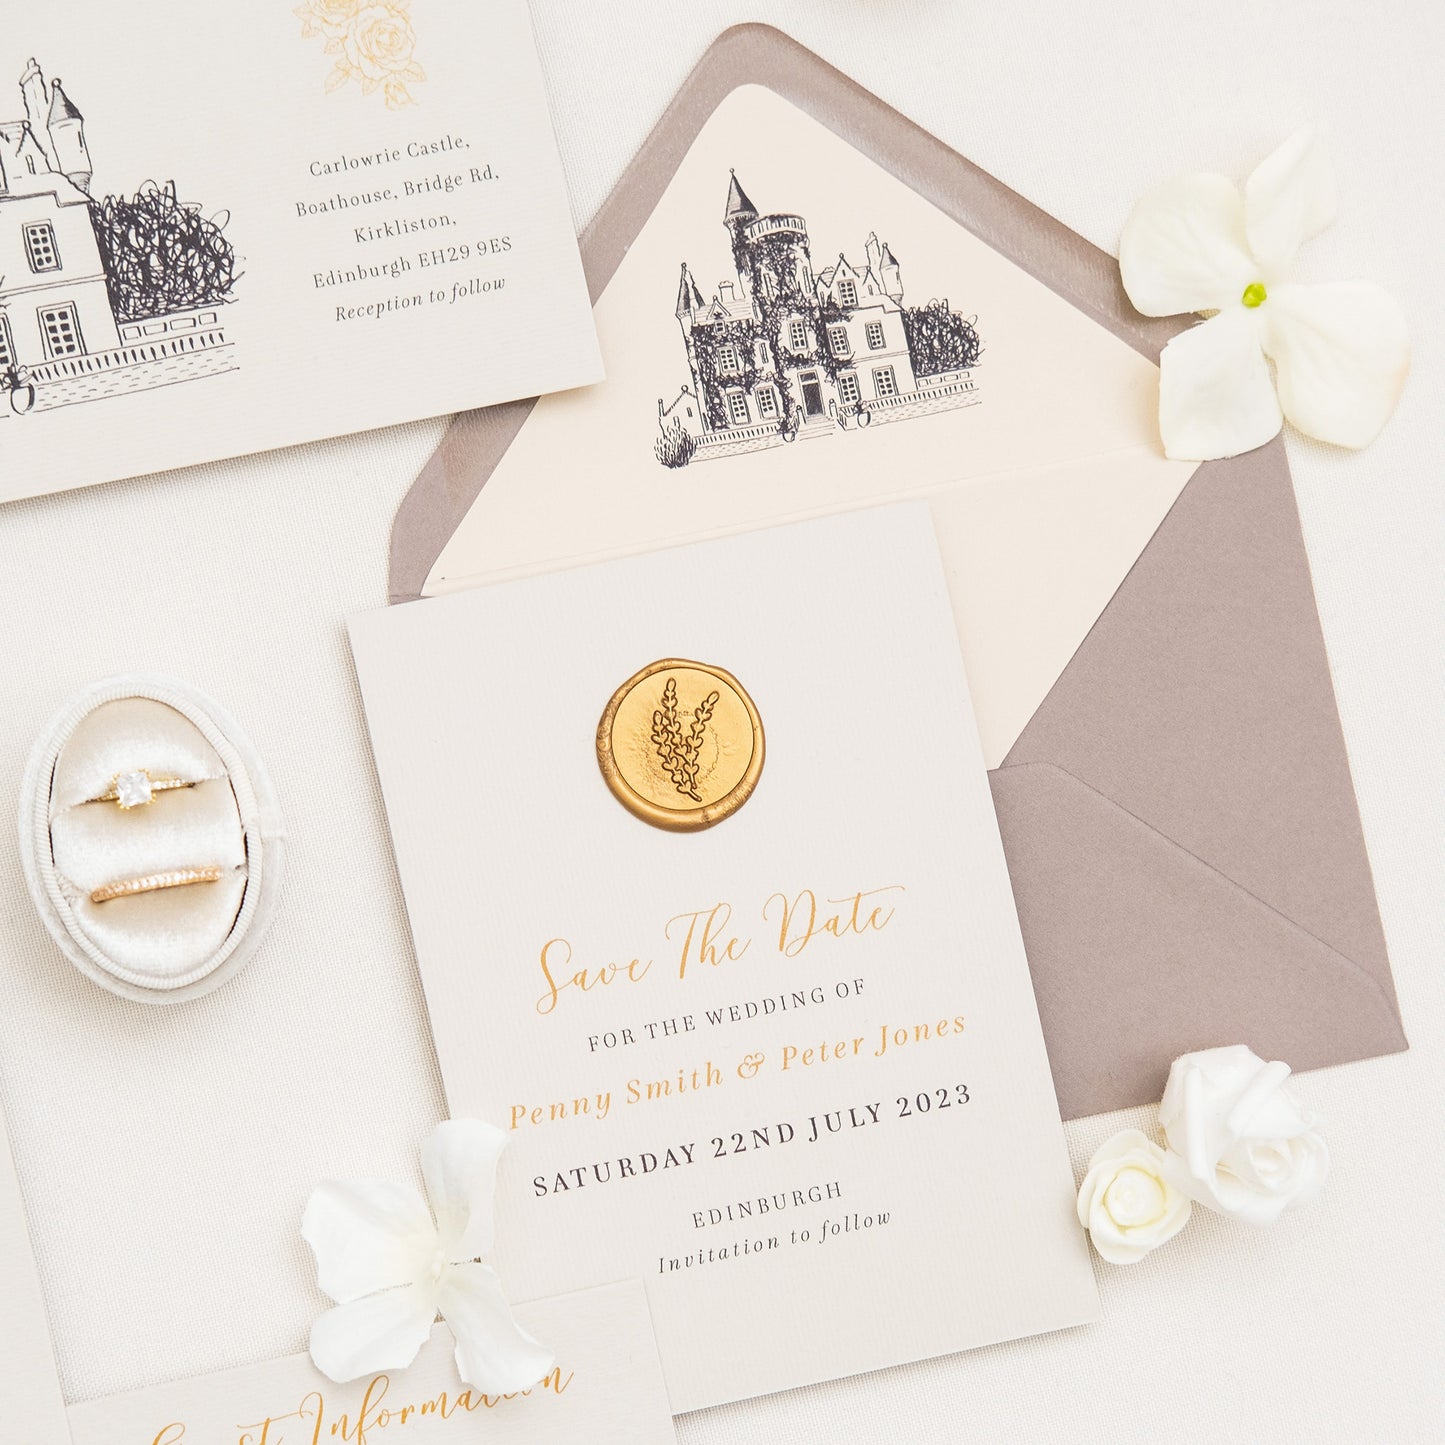 Save The Date With Gold Wax Seal And Venue Illustration